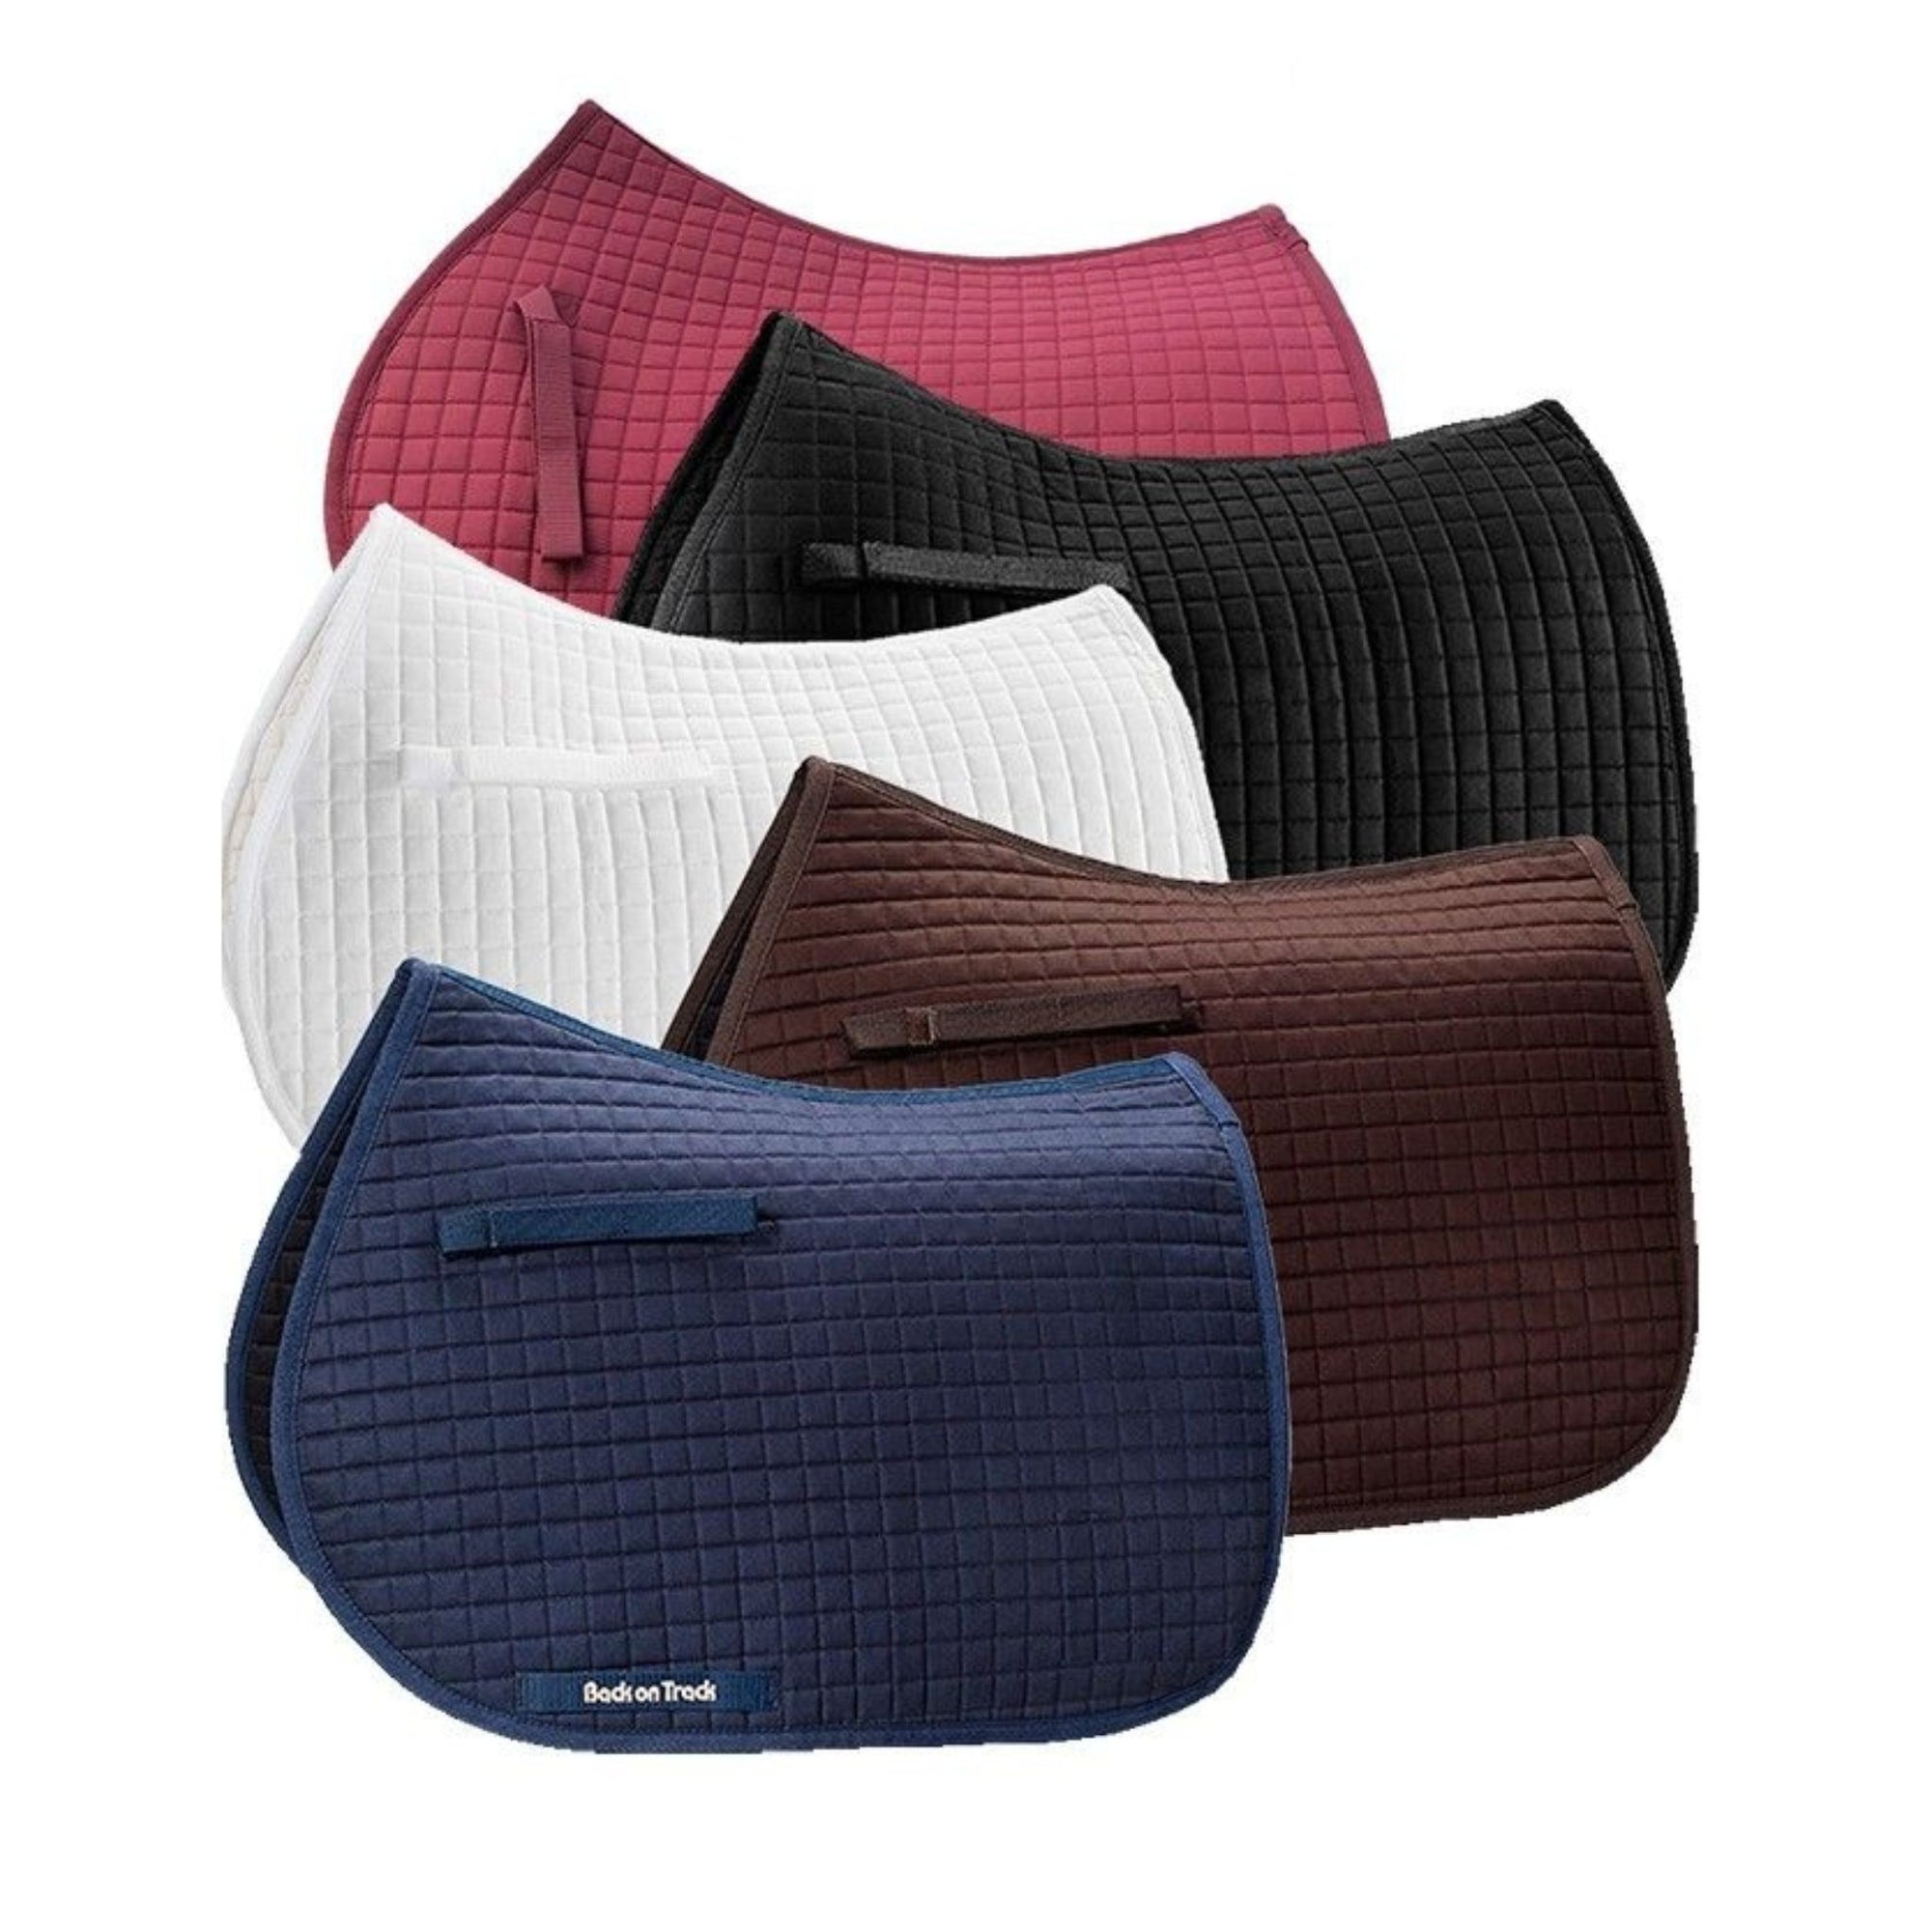 Burgundy, navy, black and white saddle pads with Velcro straps.